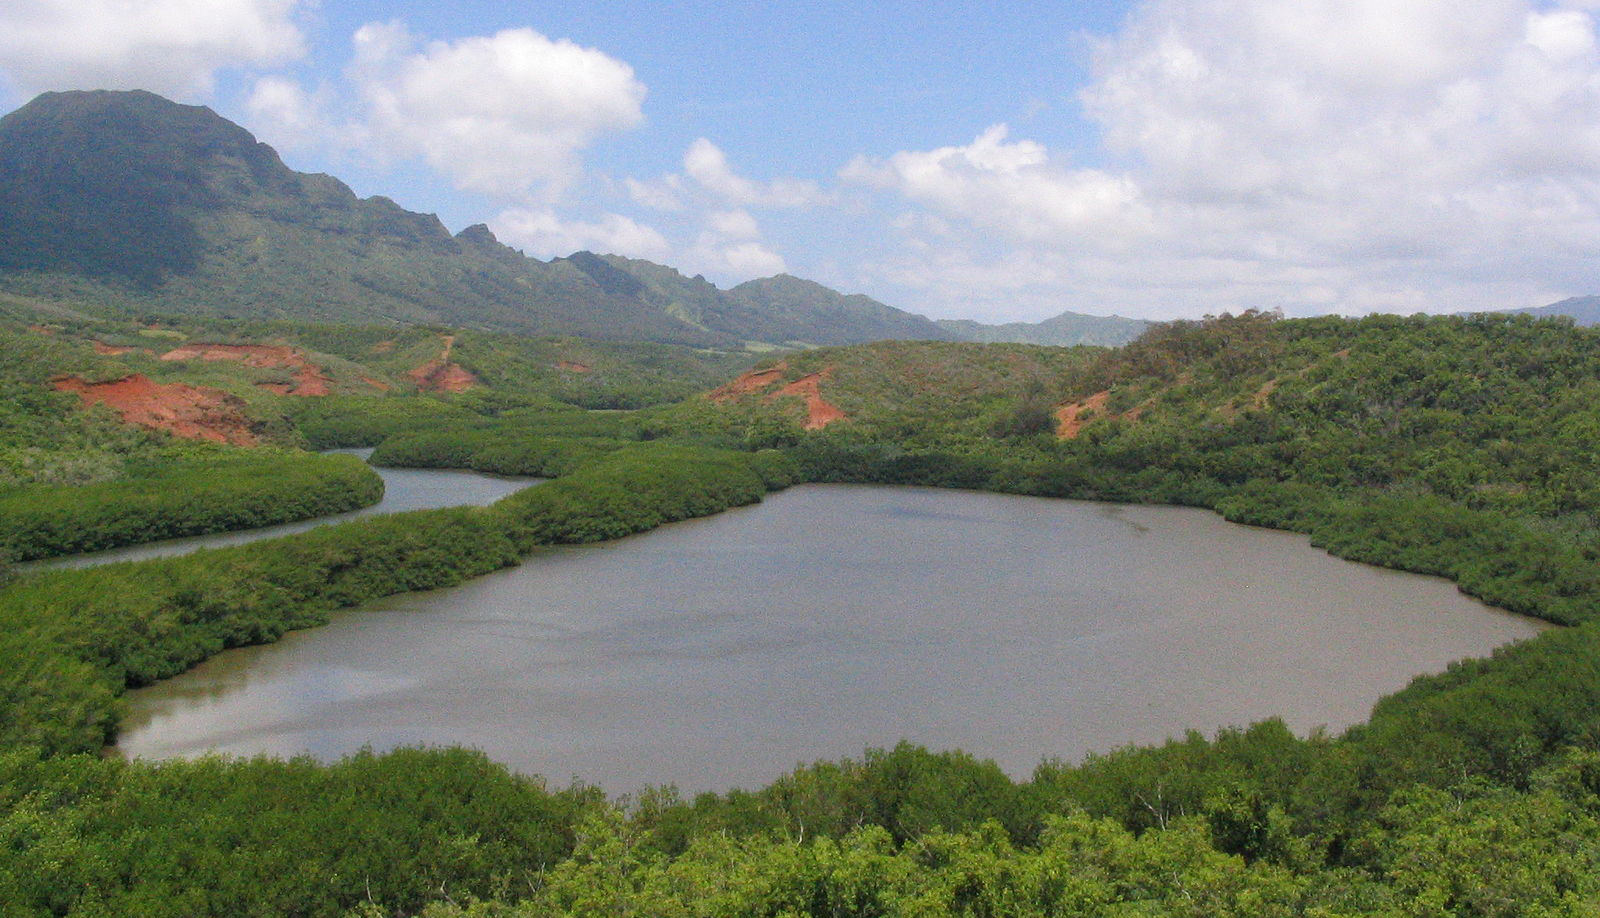 A large pond is surrounded by lush greenery